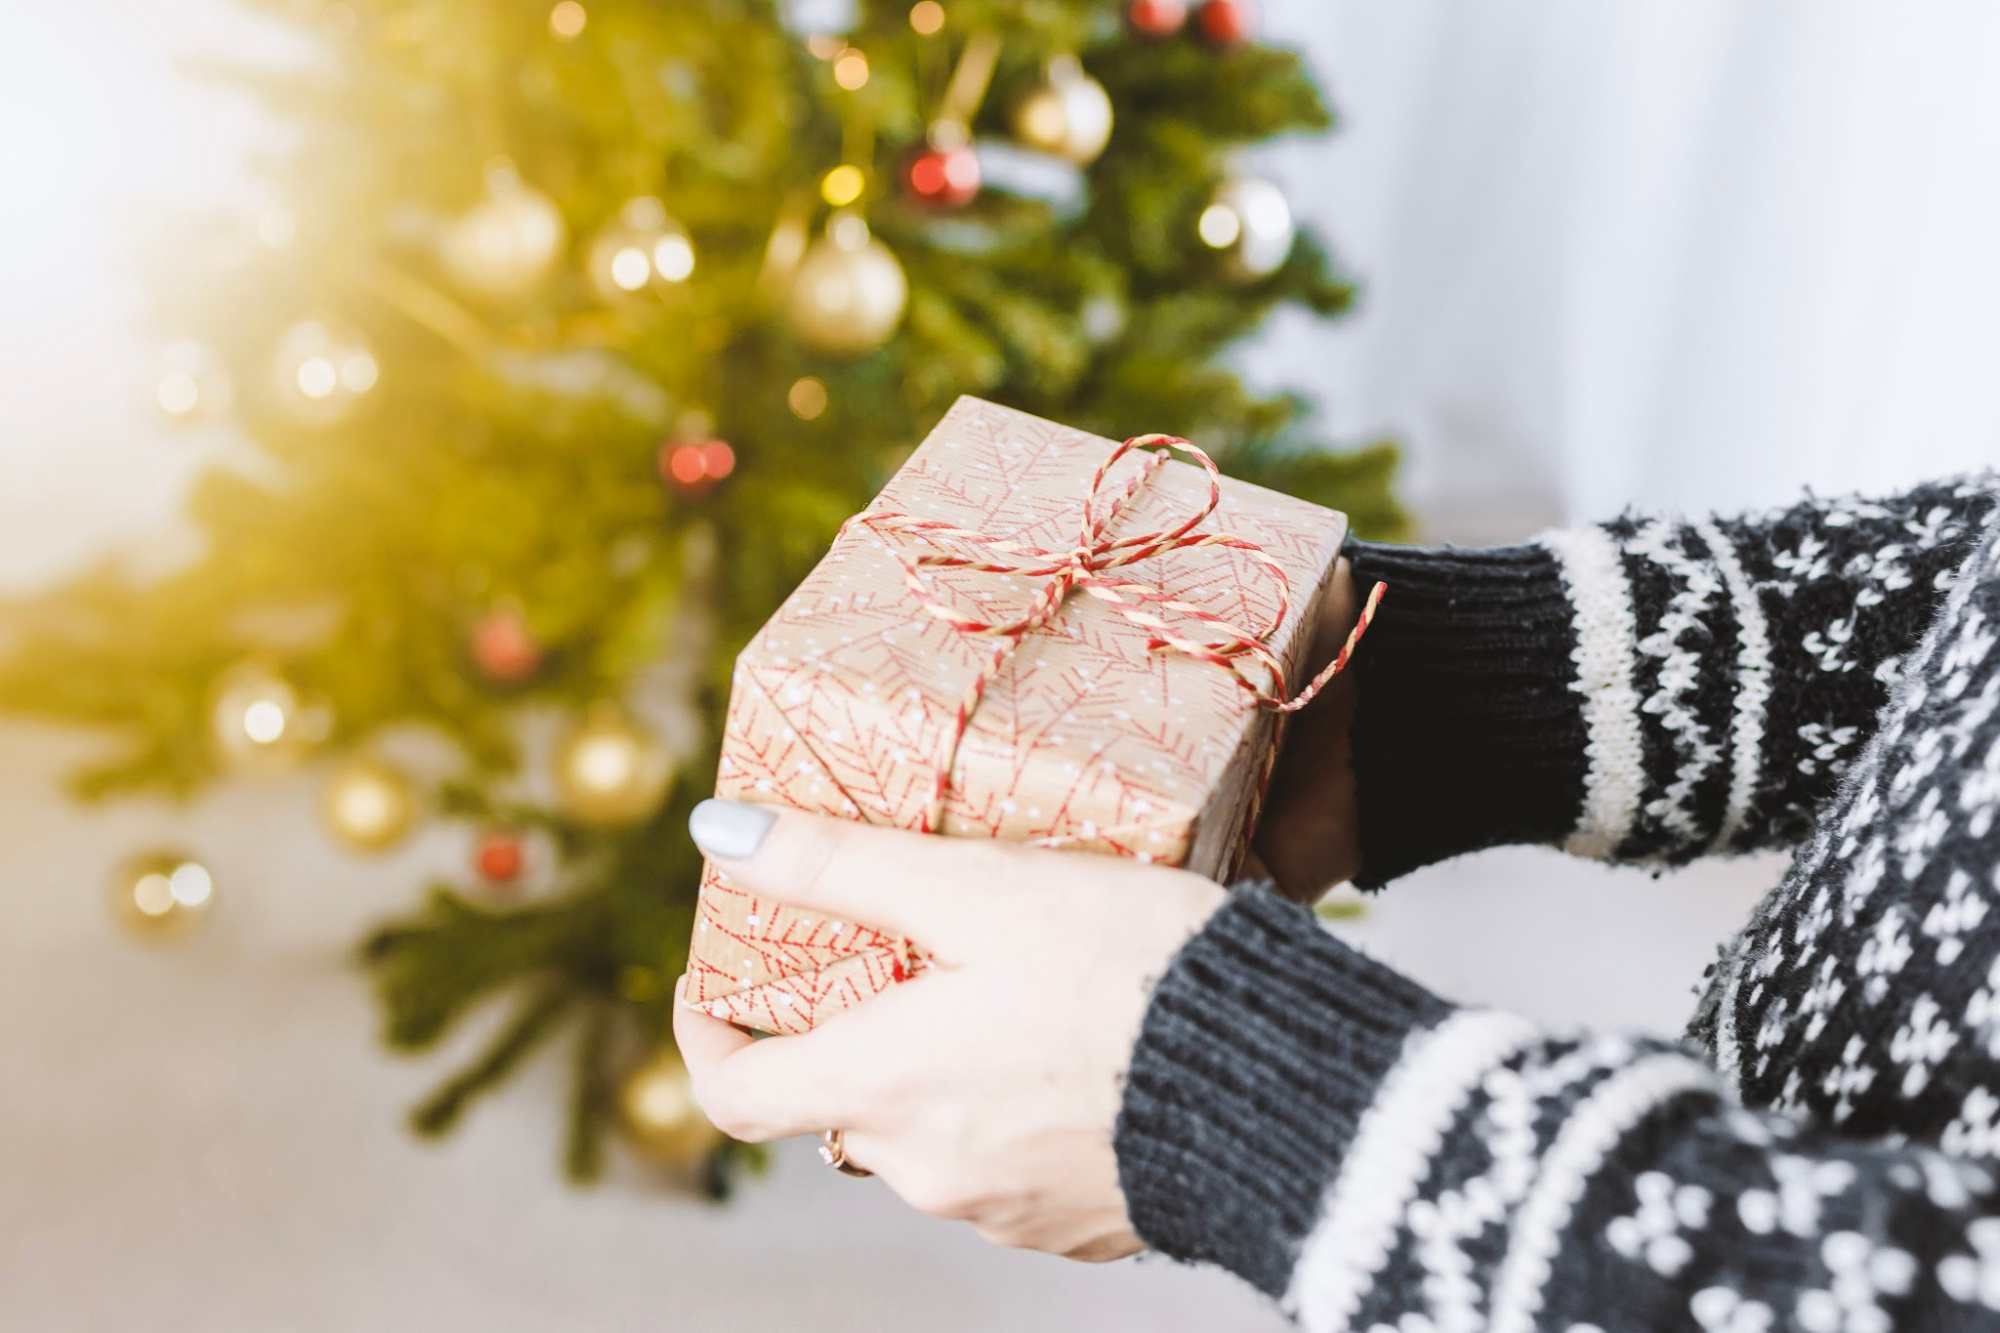 Gift ideas for simplifying gift giving